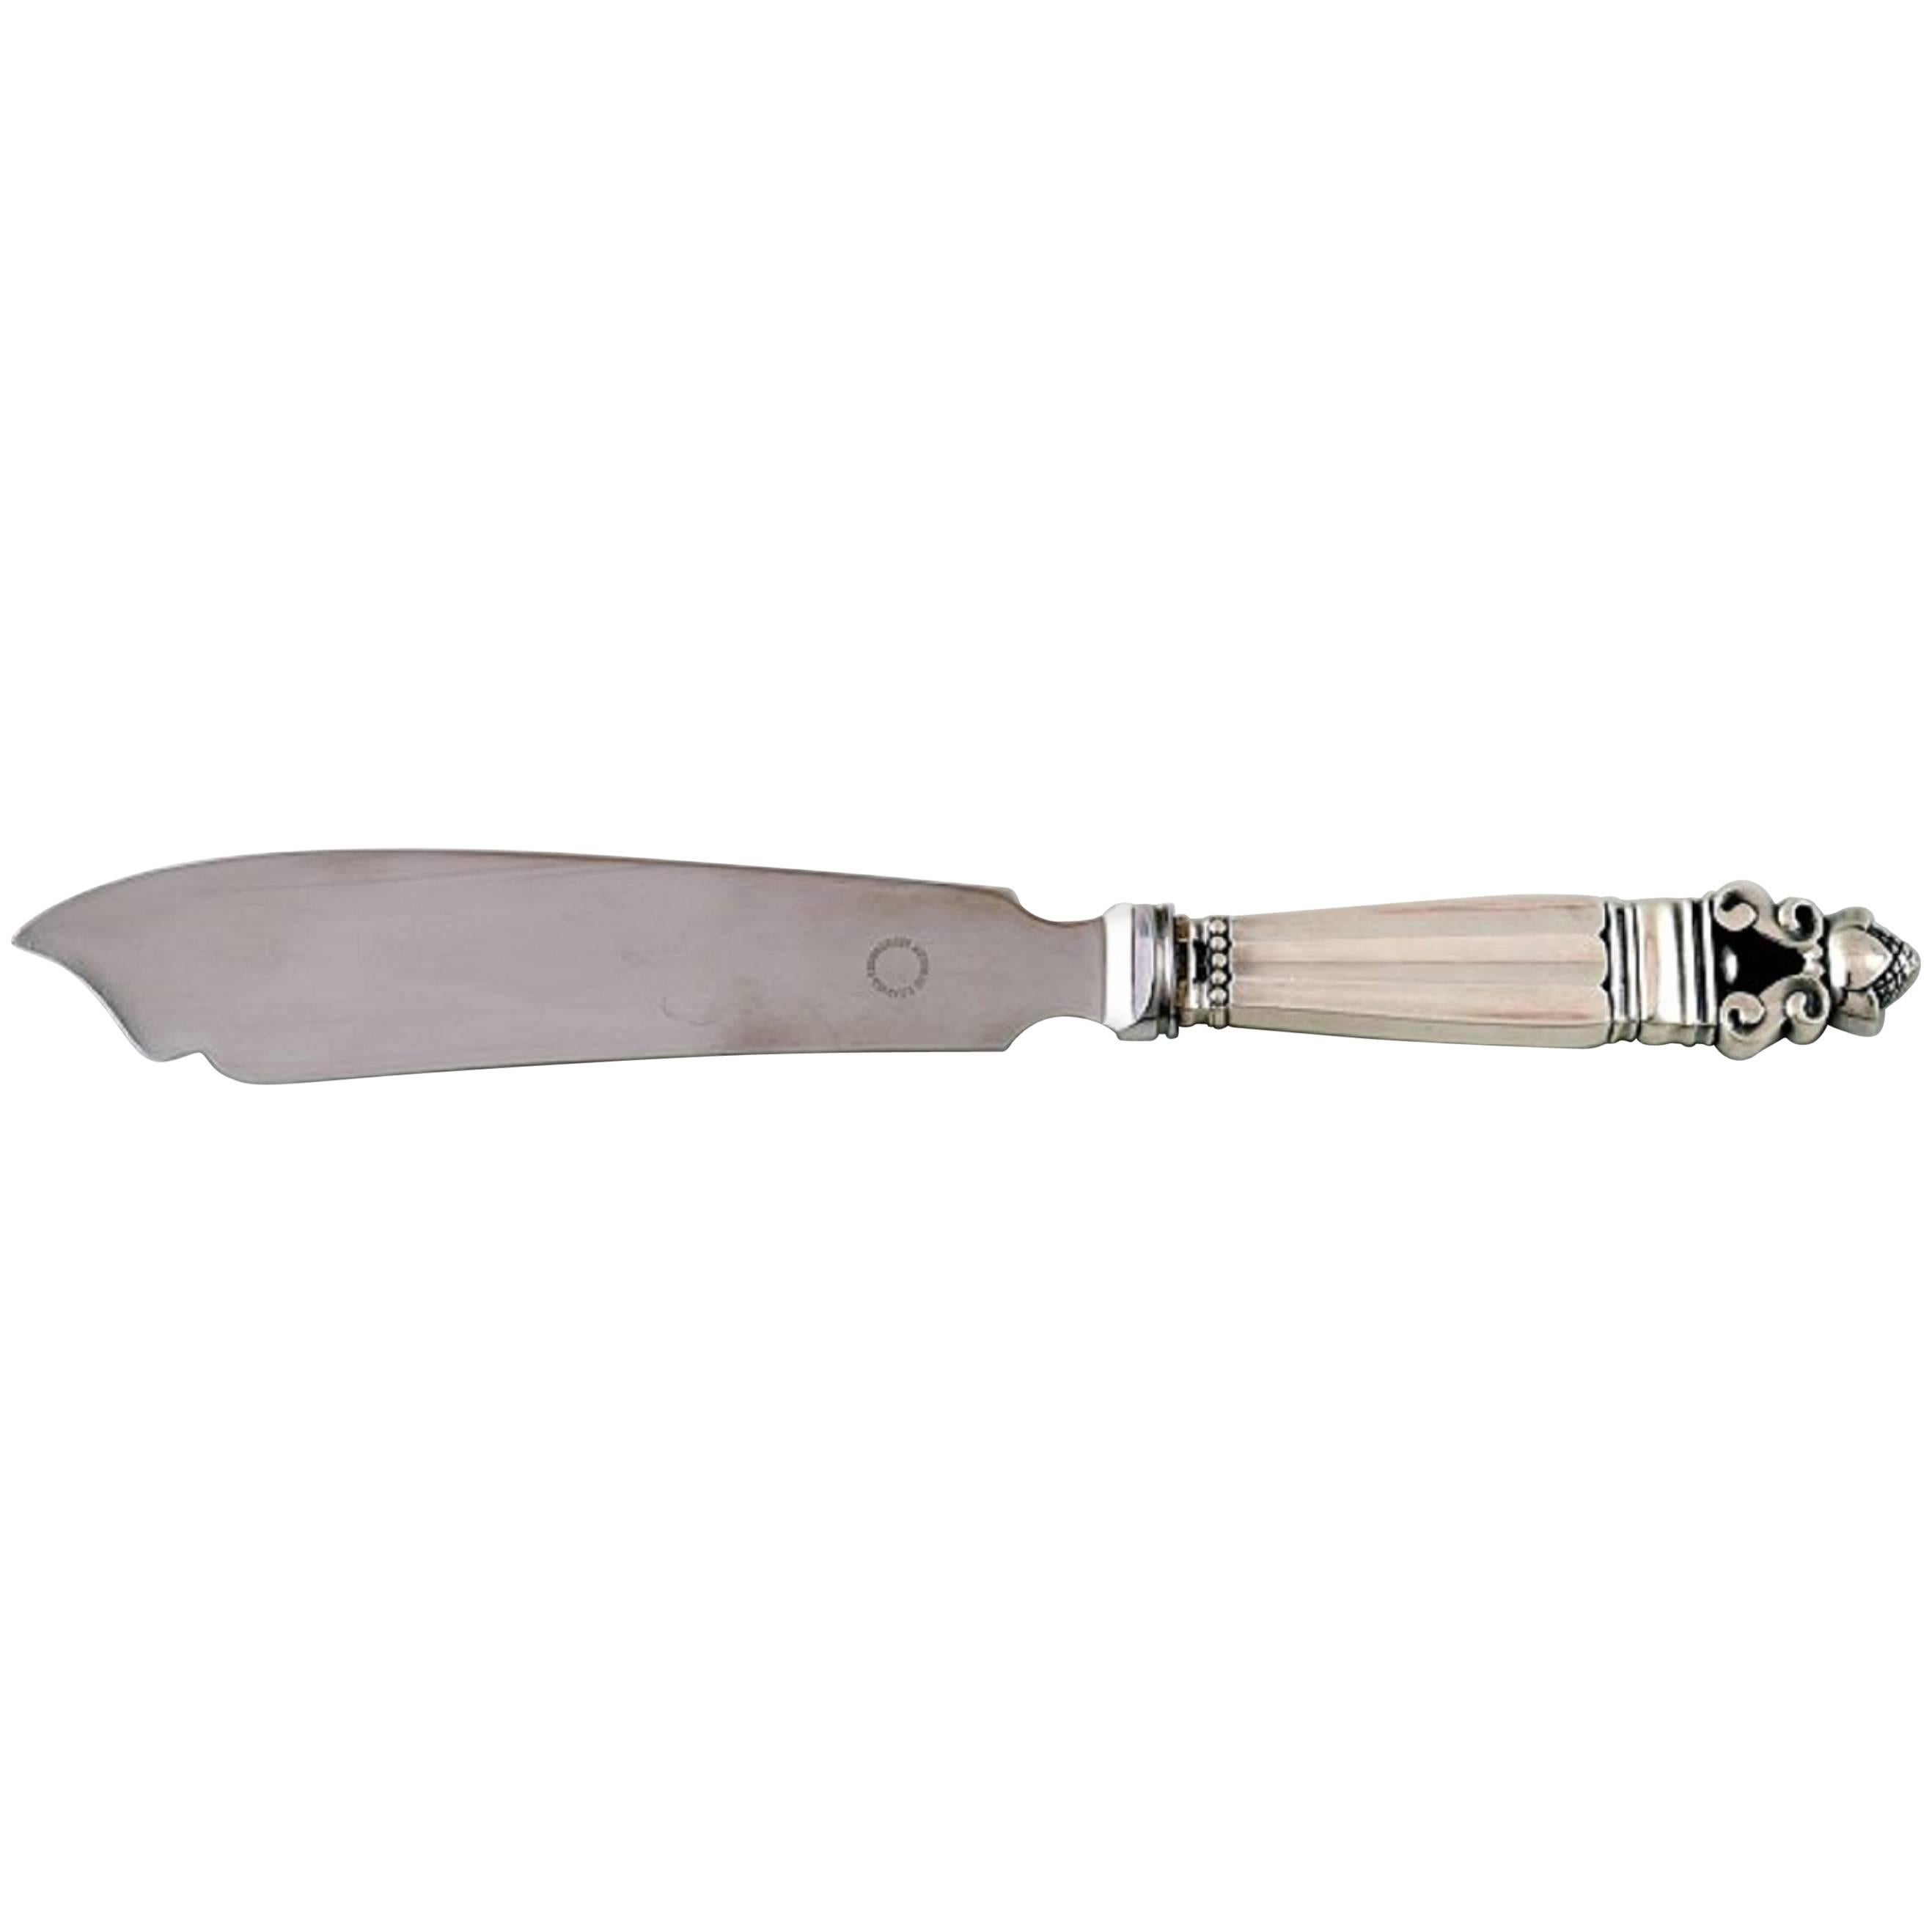 Georg Jensen Acorn Cake Knife, Sterling Silver and Stainless Steel